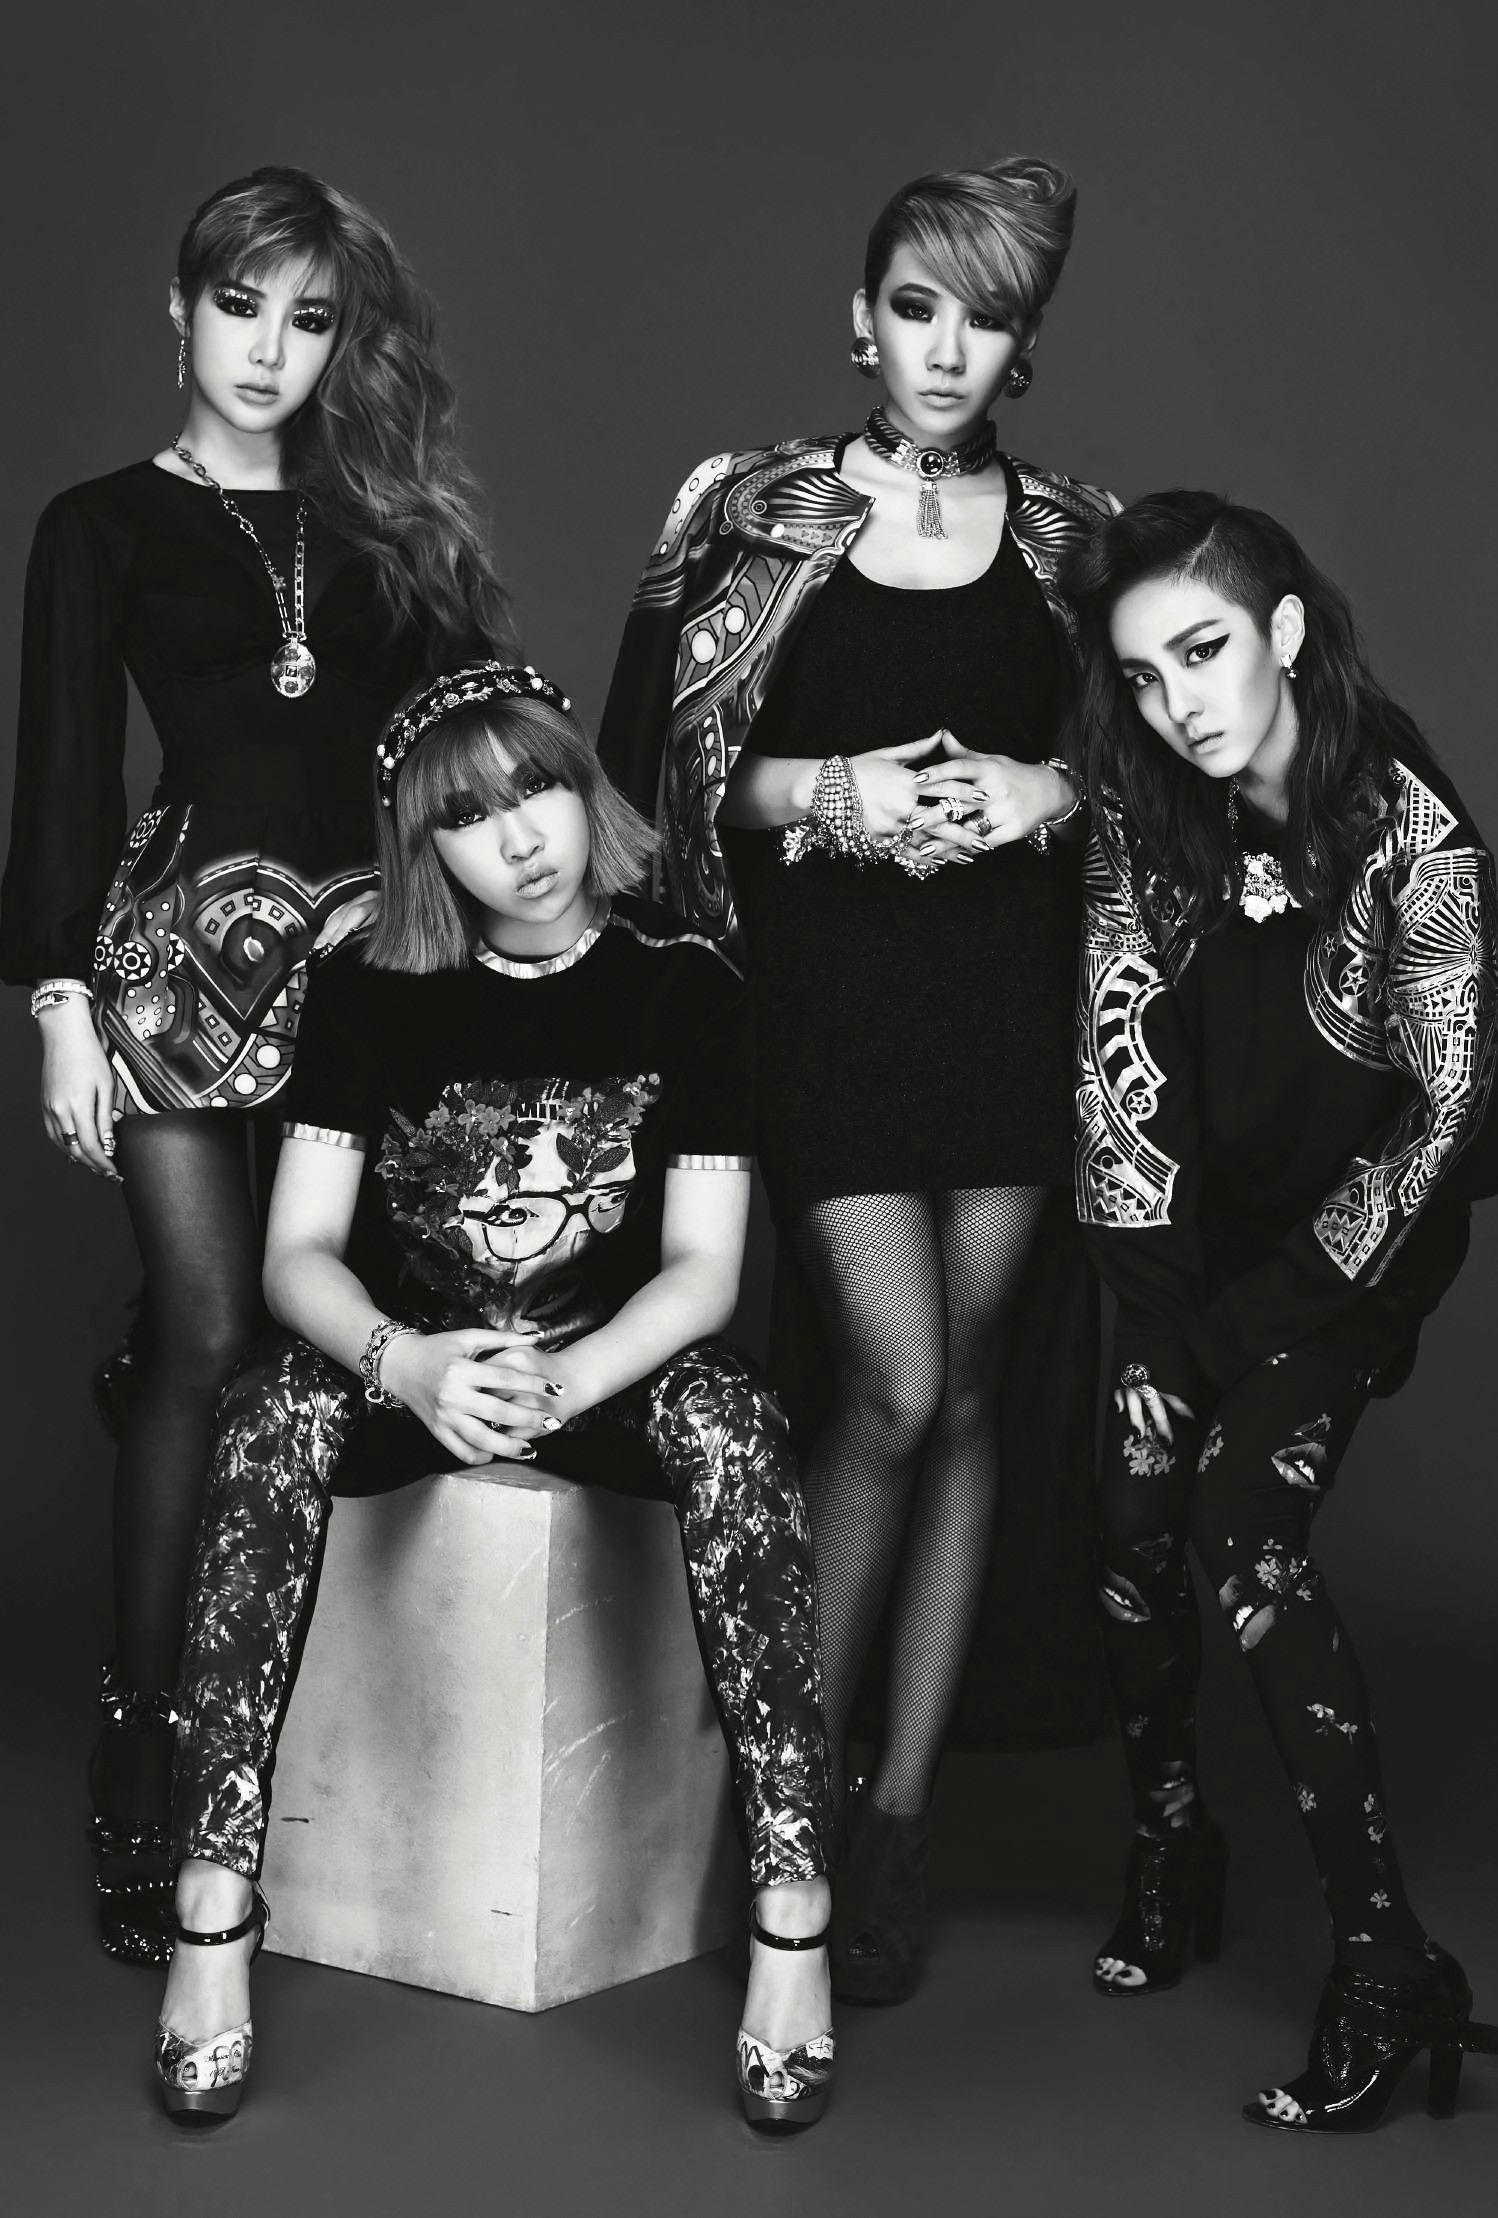 2NE1 Android IPhone Wallpaper KPOP Image Board